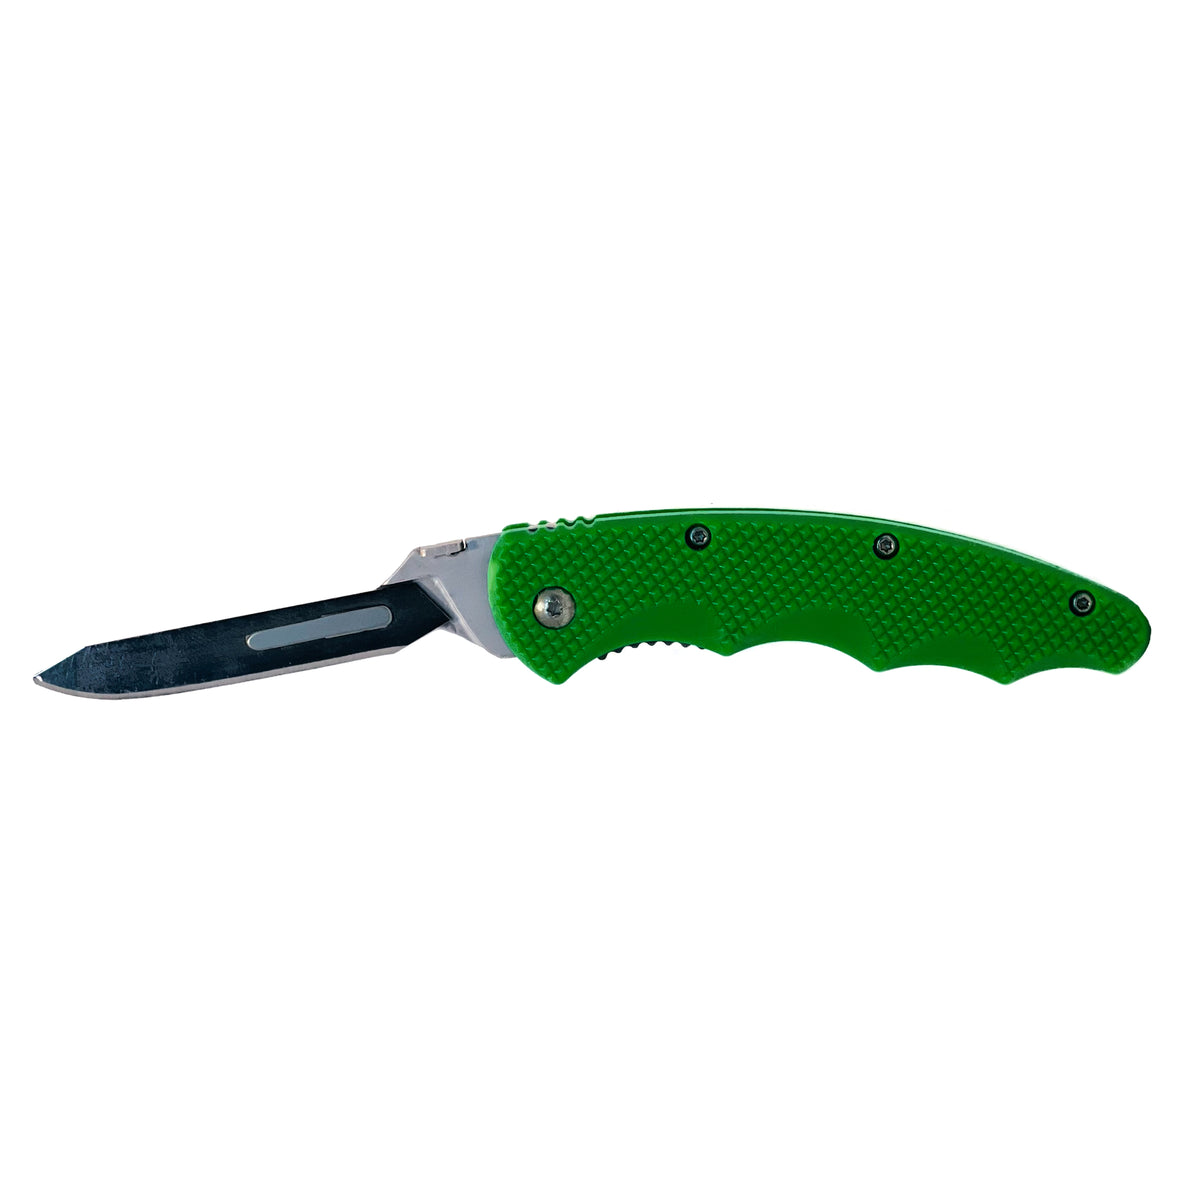 Nice double blade pocket knife from the North American Fishing